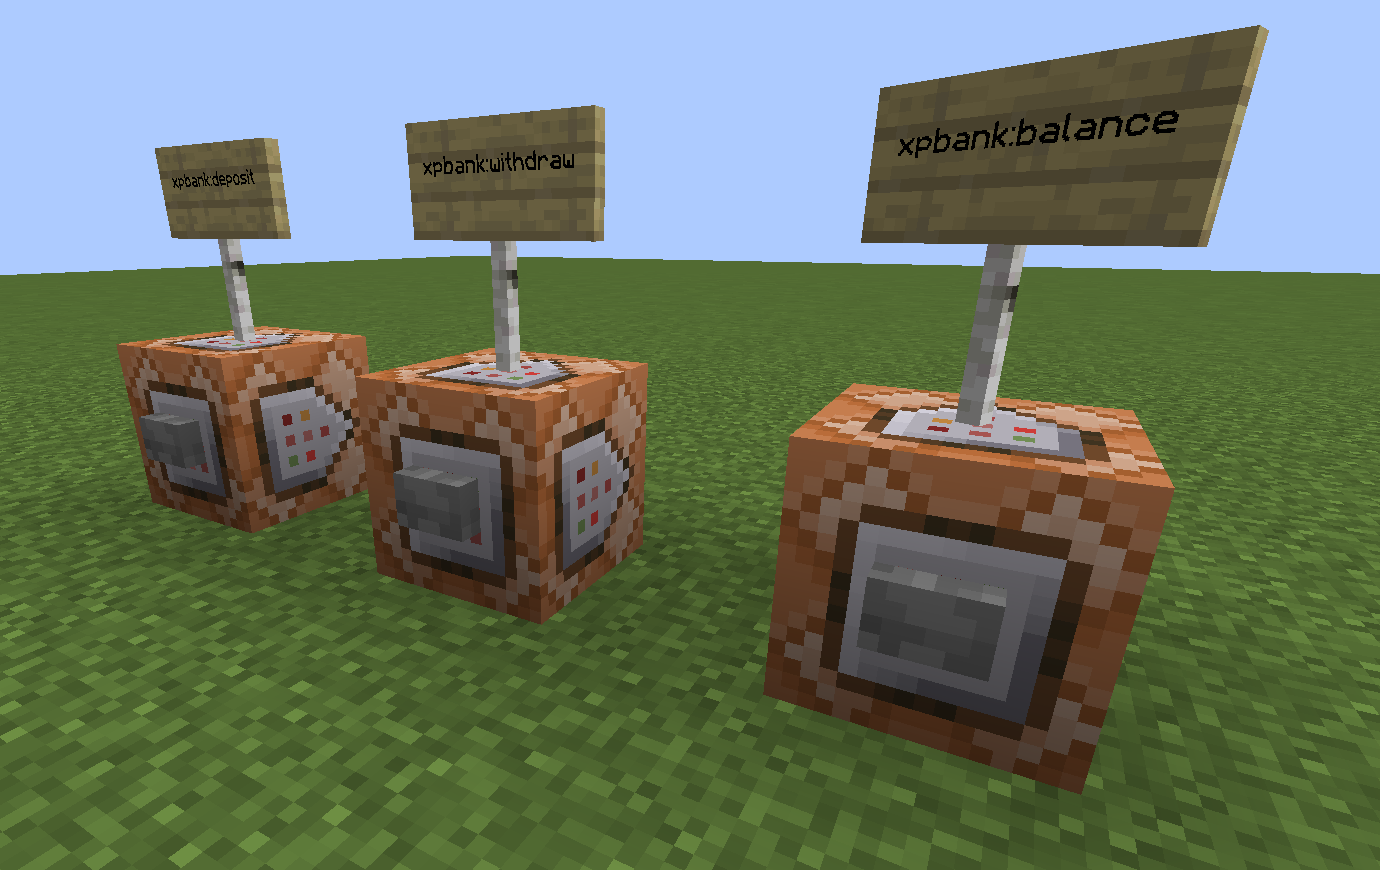 Three command blocks with signs on top